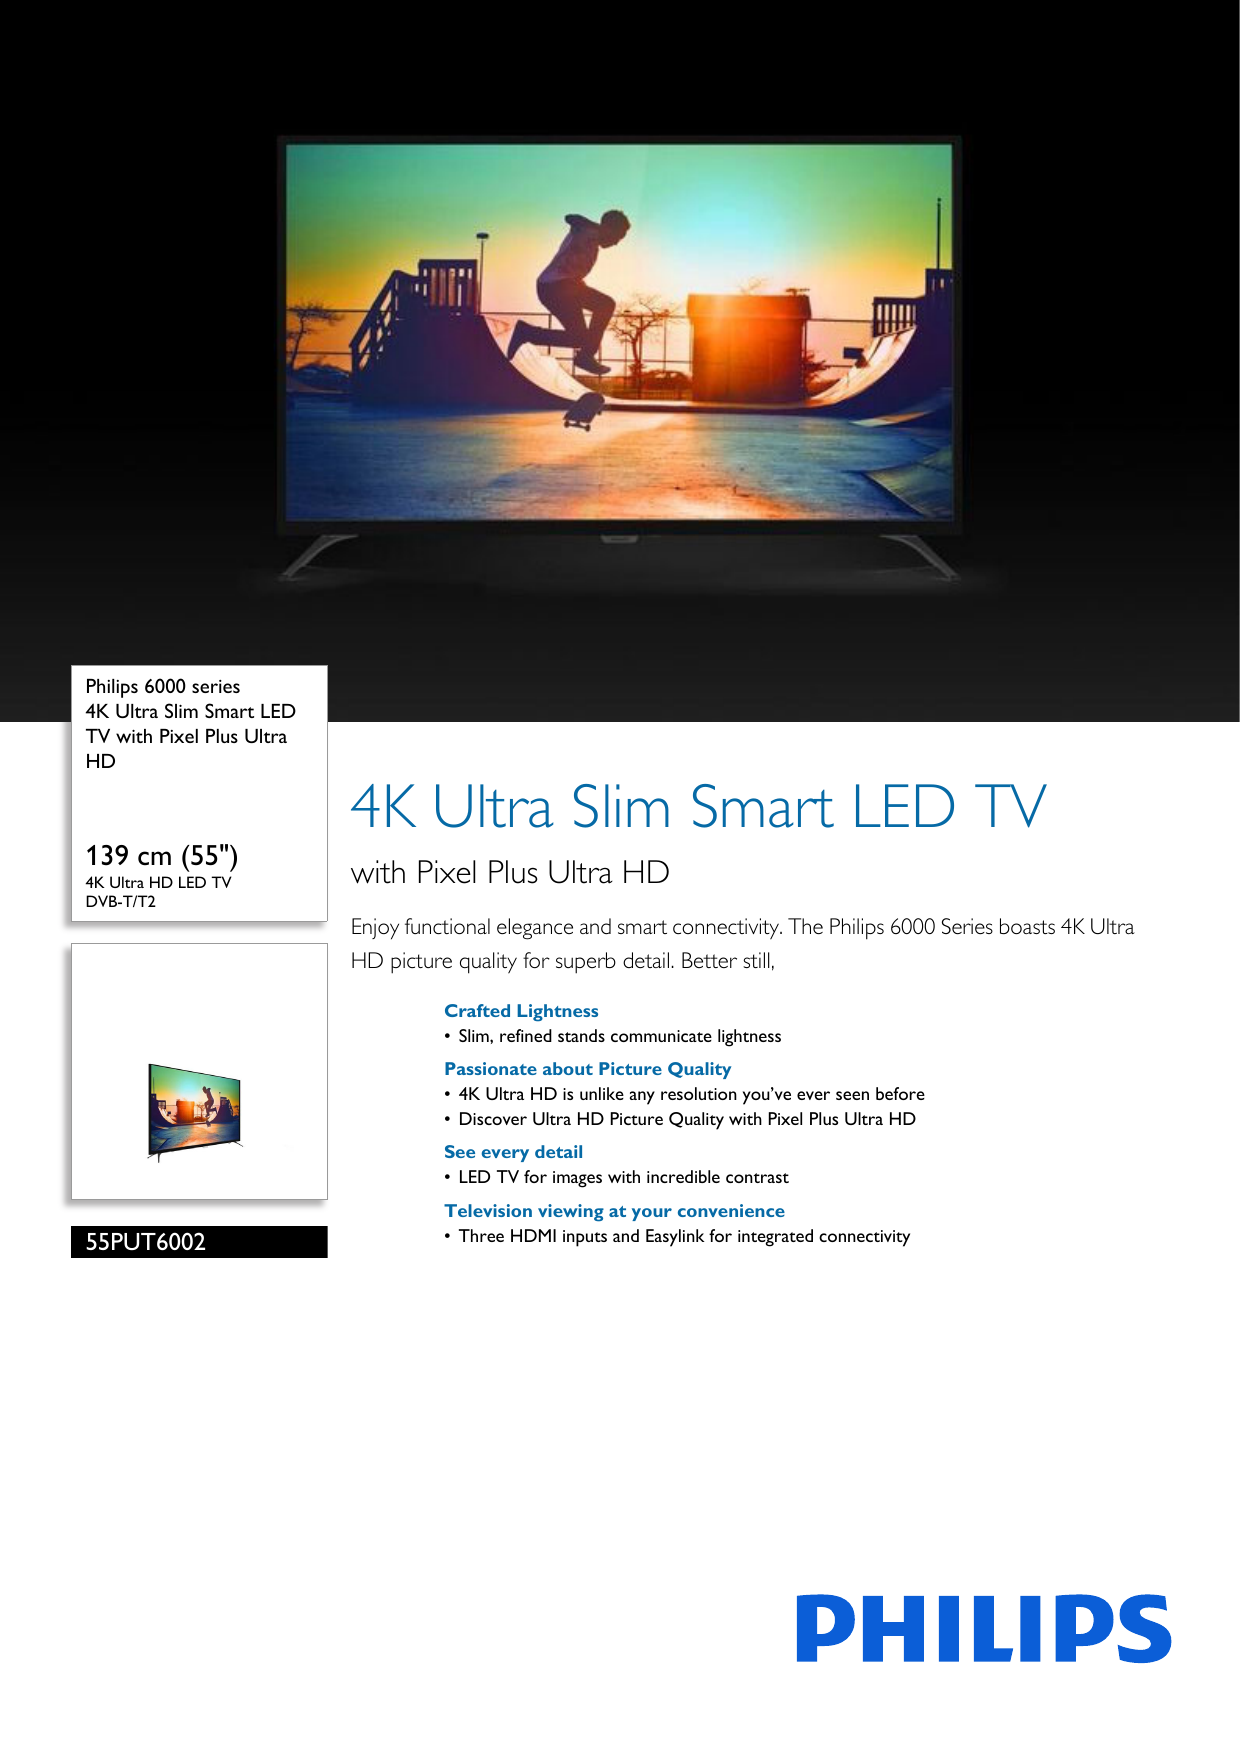 Page 1 of 3 - Philips 55PUT6002/98 4K Ultra Slim Smart LED TV With Pixel Plus HD User Manual Leaflet 55put6002 98 Pss Engsg